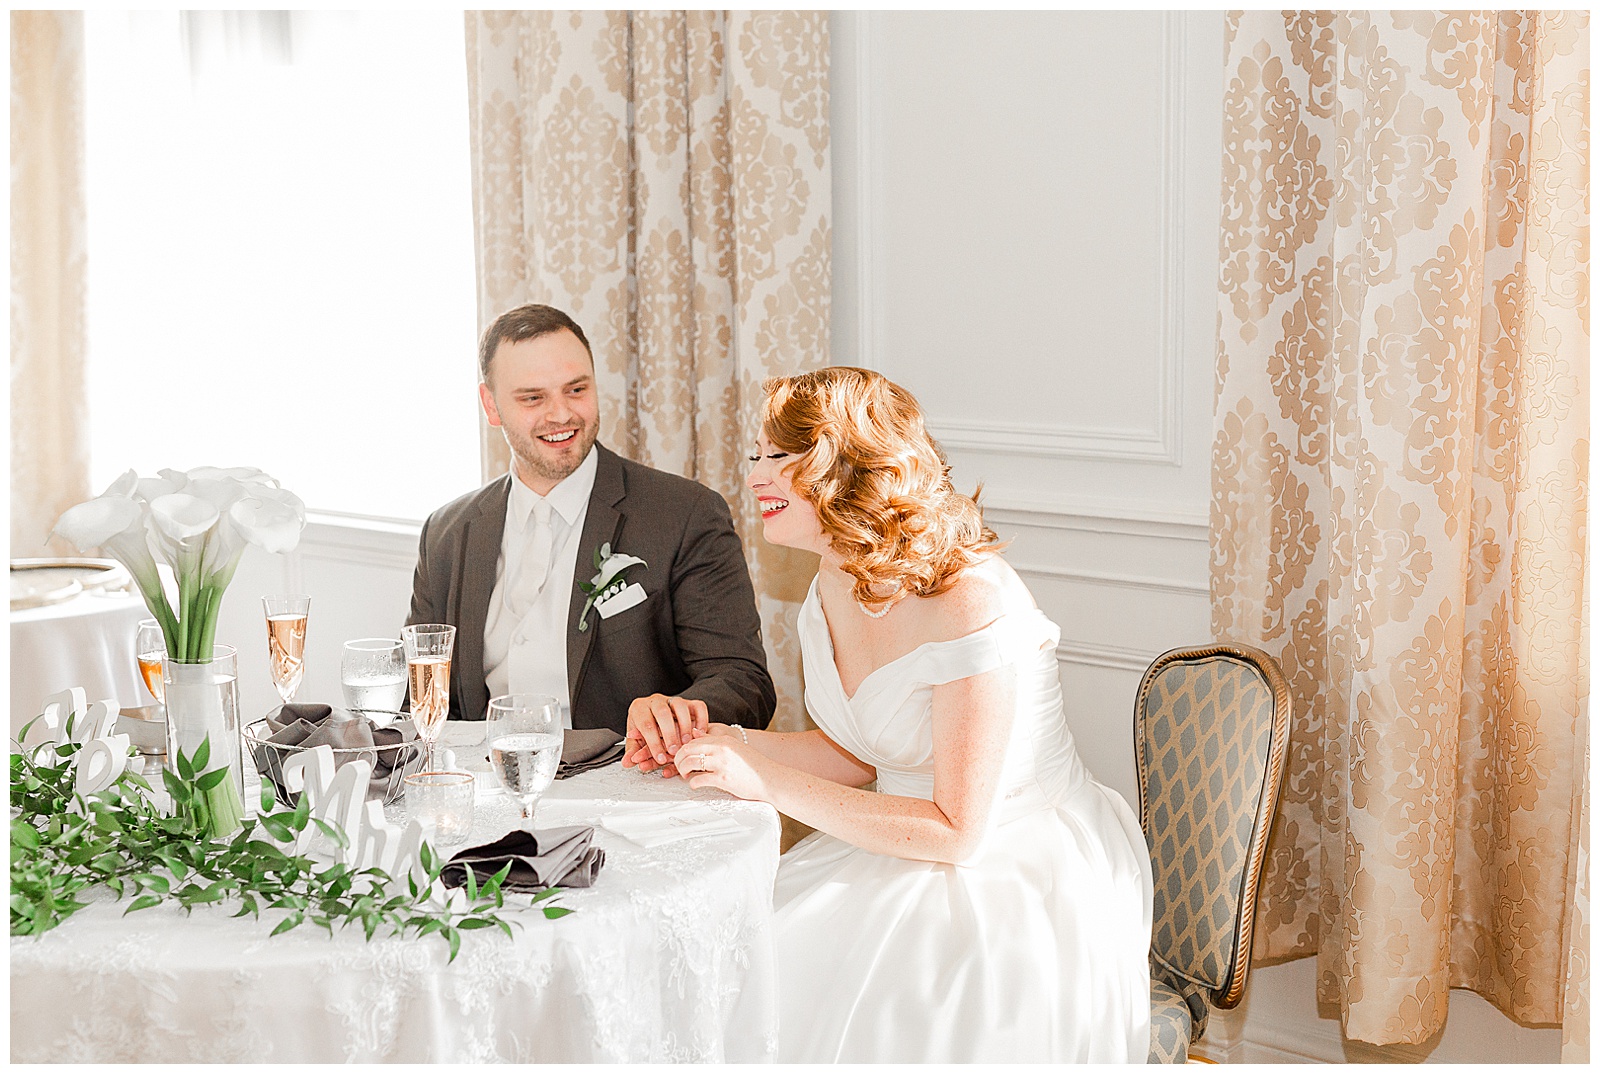 Gorgeous Red-Haired Bride and Groom at Elegant 1940s Modern Vintage Wedding in Charlotte, NC | check out the full wedding at KevynDixonPhoto.com 